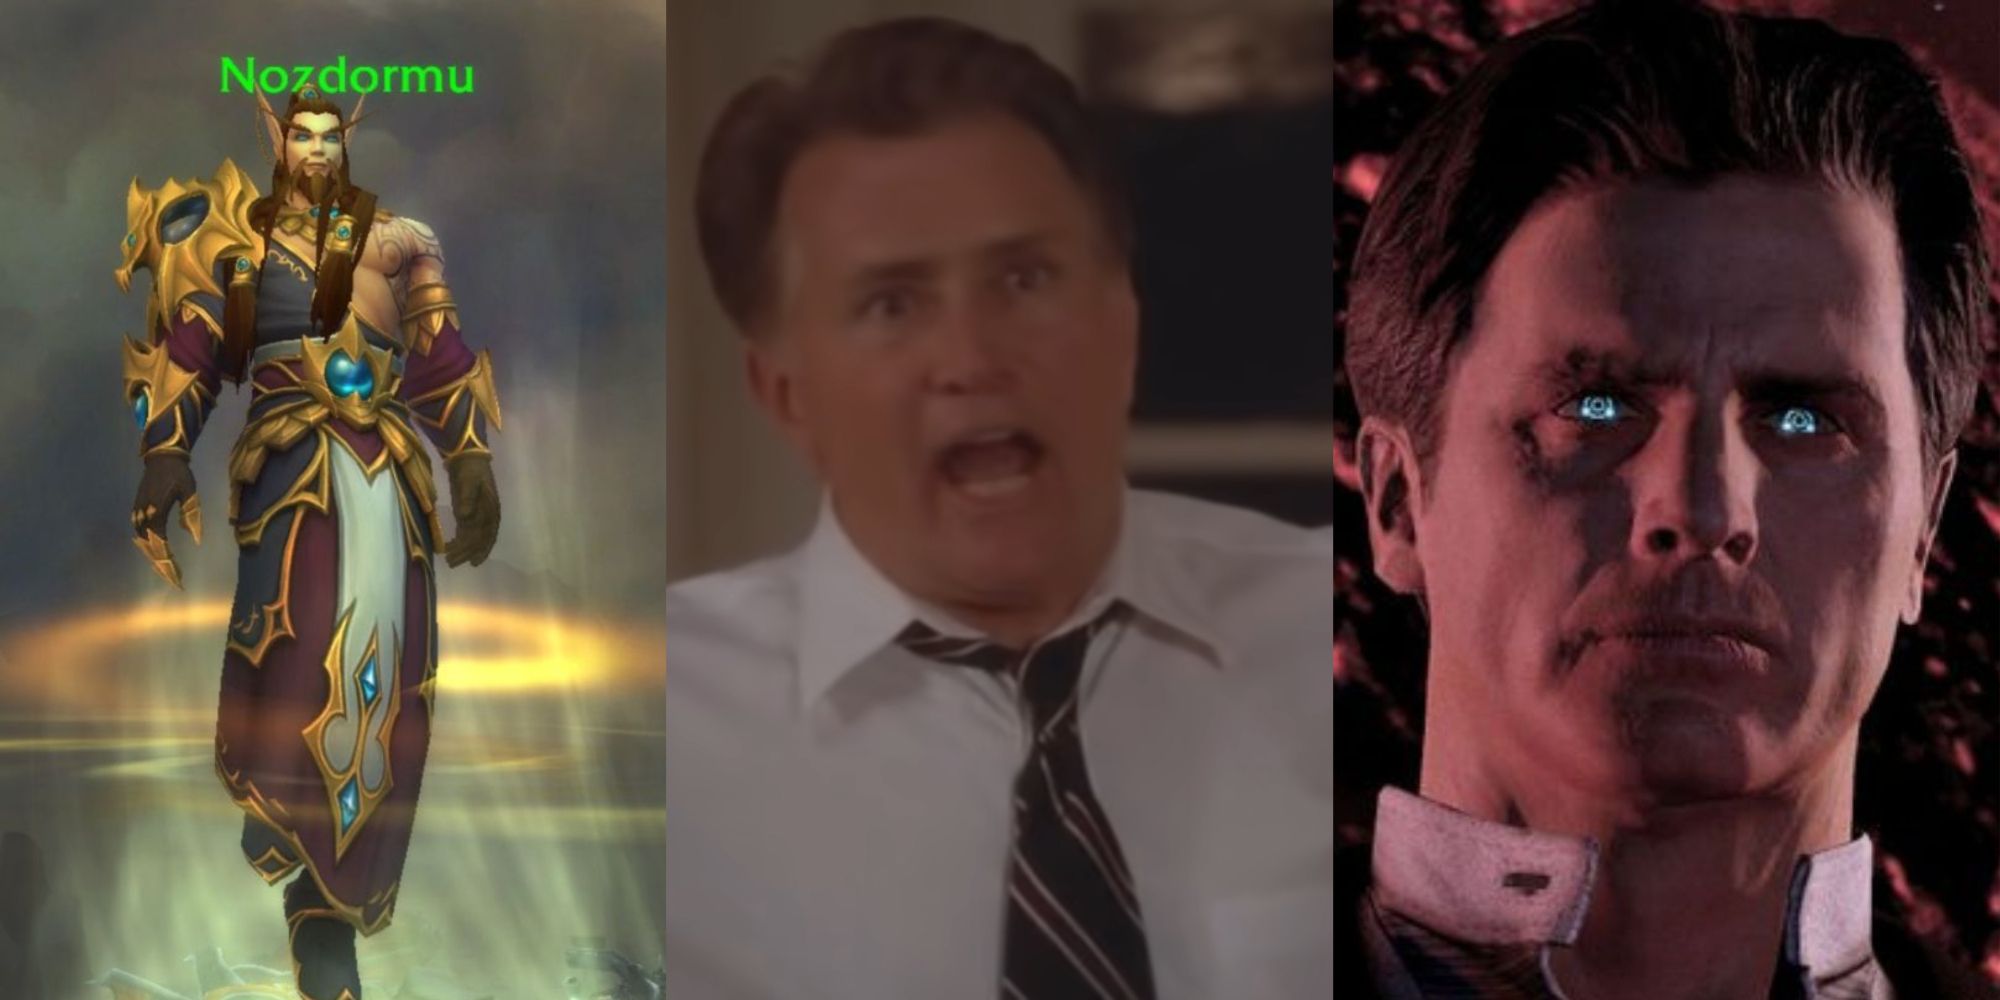 Three split images of Martin Sheen's WoW character Nozdormu, Sheen playing President Josiah Bartlett in The West Wing, and the Illusive Man in Mass Effect.